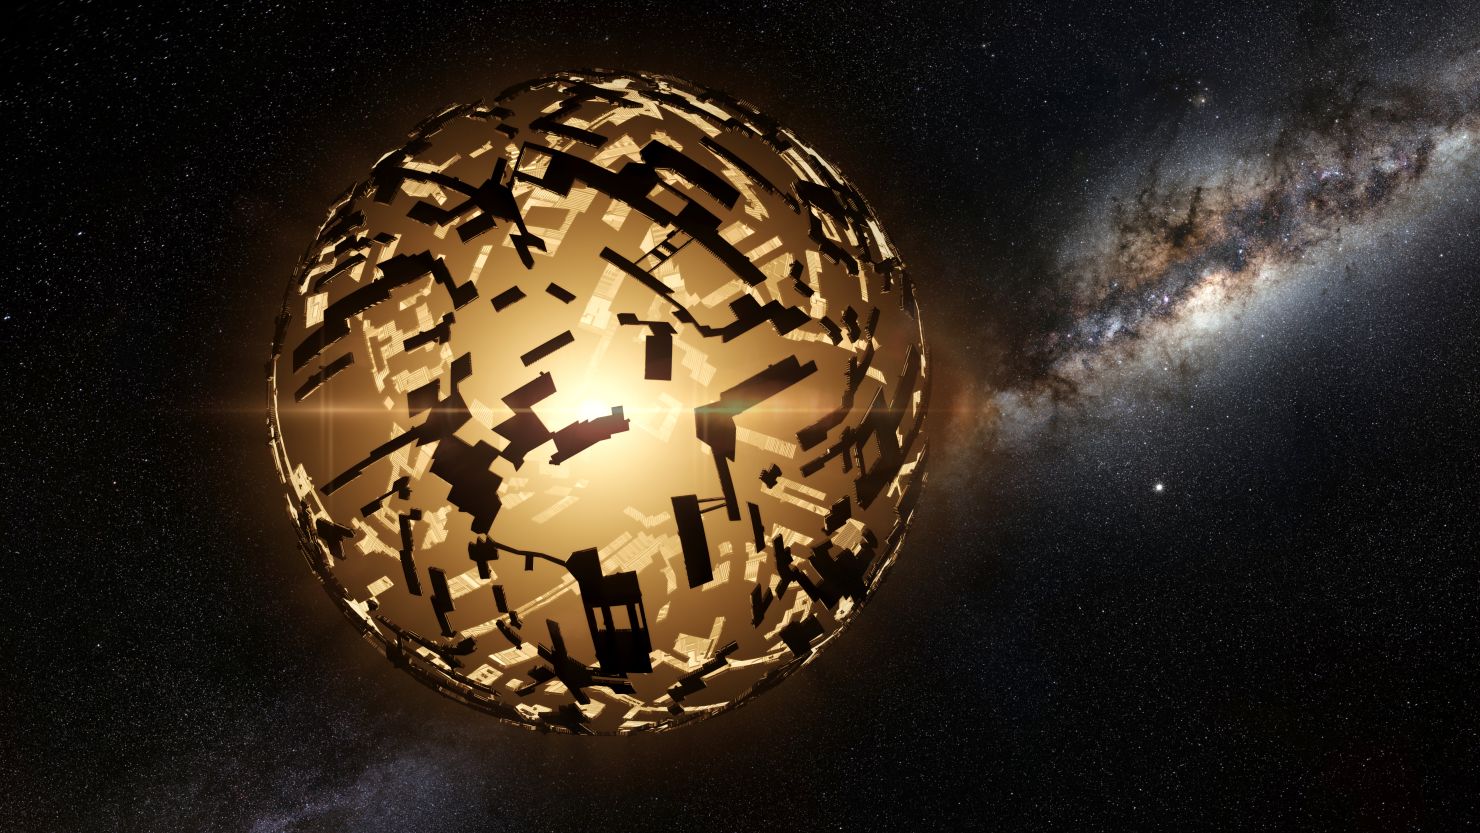 Freeman Dyson theorized that hypothetical alien megastructures would give off infrared radiation and searching for that byproduct would be a viable method for searching for extraterrestrial life.